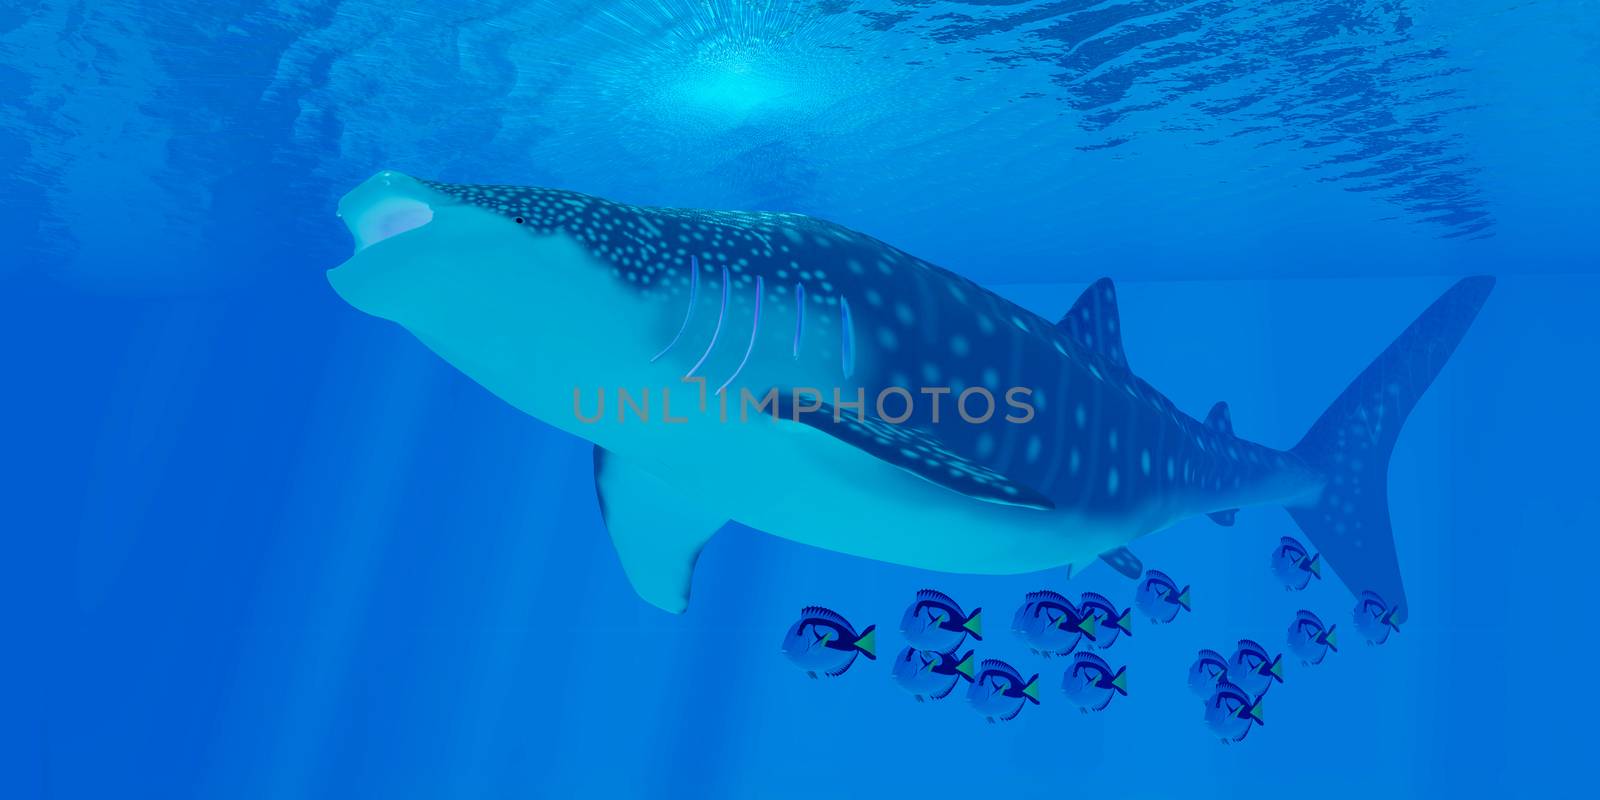 Whale sharks are the largest shark in the ocean but feed on the smallest plankton creatures.